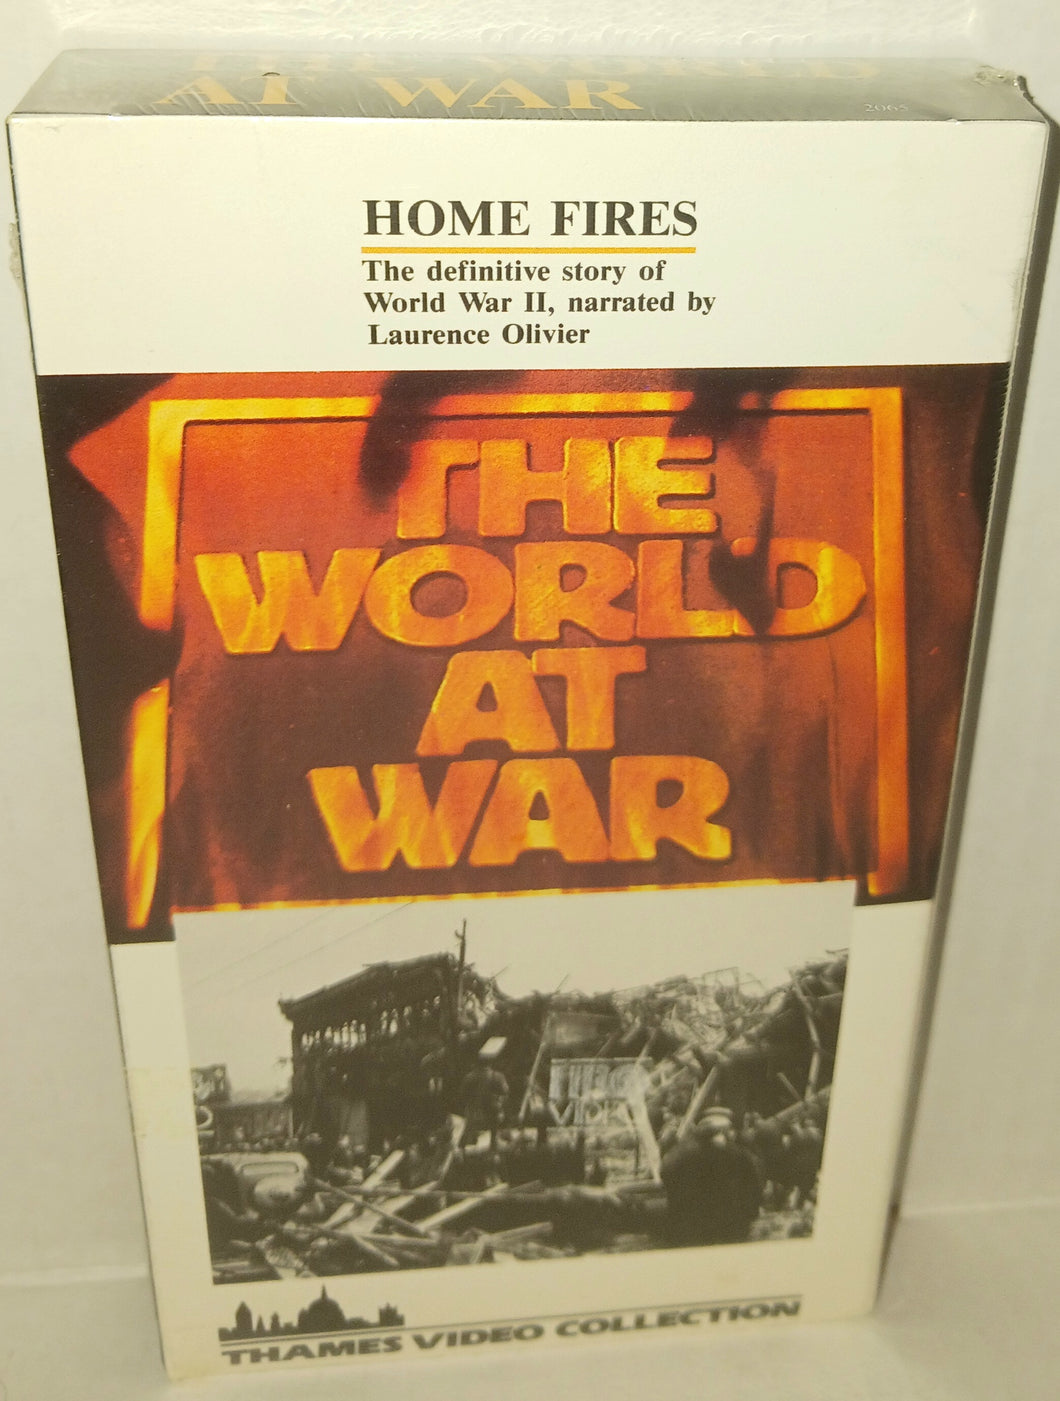 The World At War Home Fires WWII VHS Tape NWT New Vintage 1992 Thames Video Collection HBO 2065